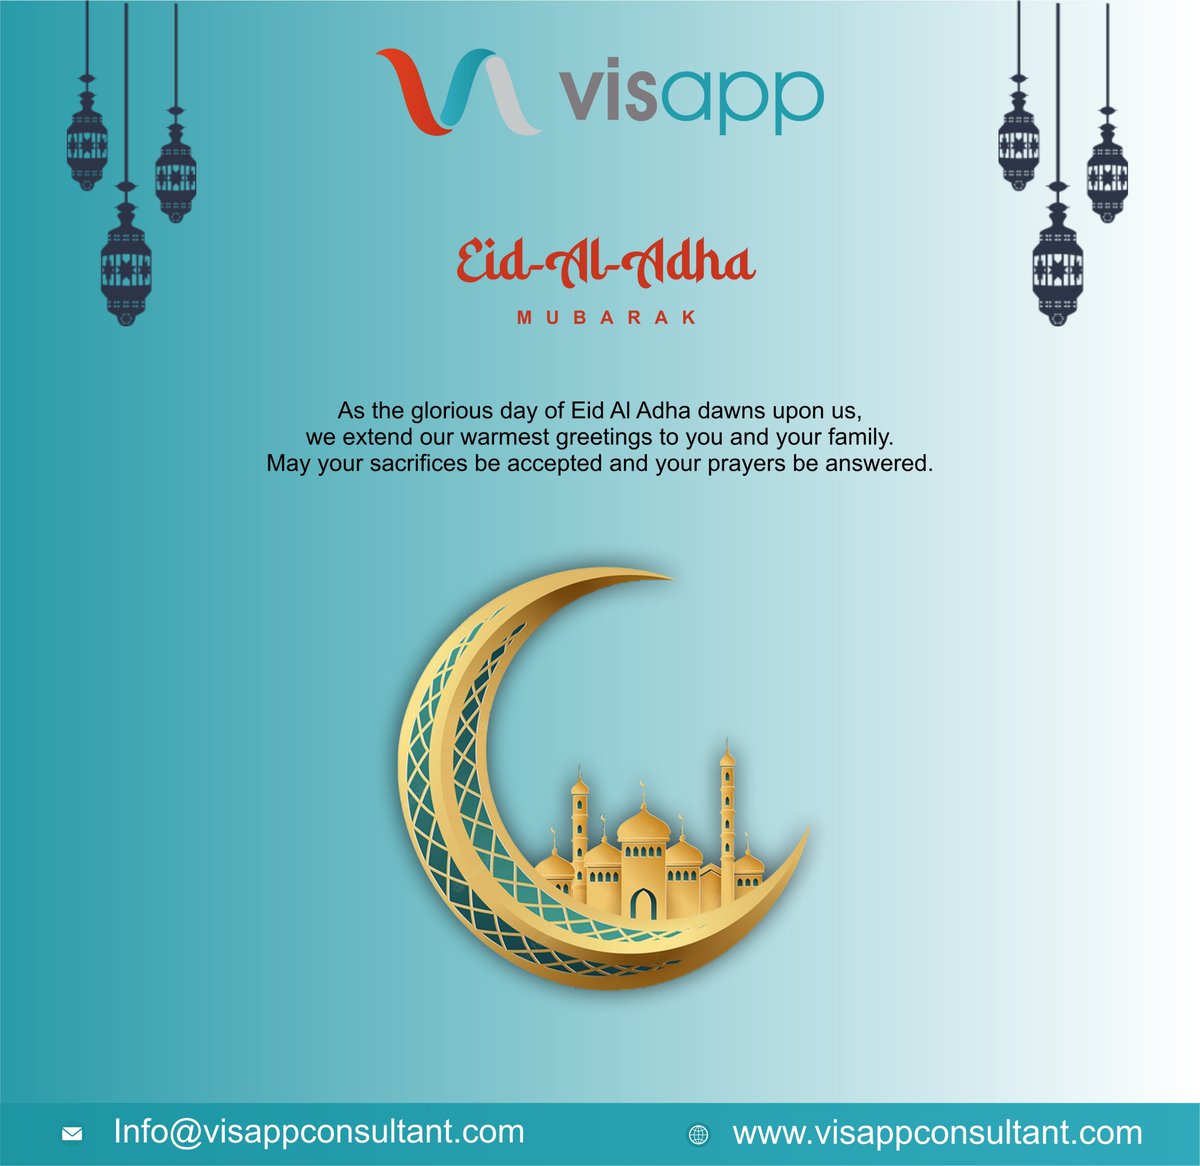 On this joyous occasion of Eid Al Adha, Visapp Consultants extends warm wishes of love, peace, and prosperity to you and your family. 

#EidAlAdha #EidMubarak #FestivalofSacrifice #Blessings #Joy #Peace #Prosperity #Unity #Compassion #Sharing #ImmigrationConsultants